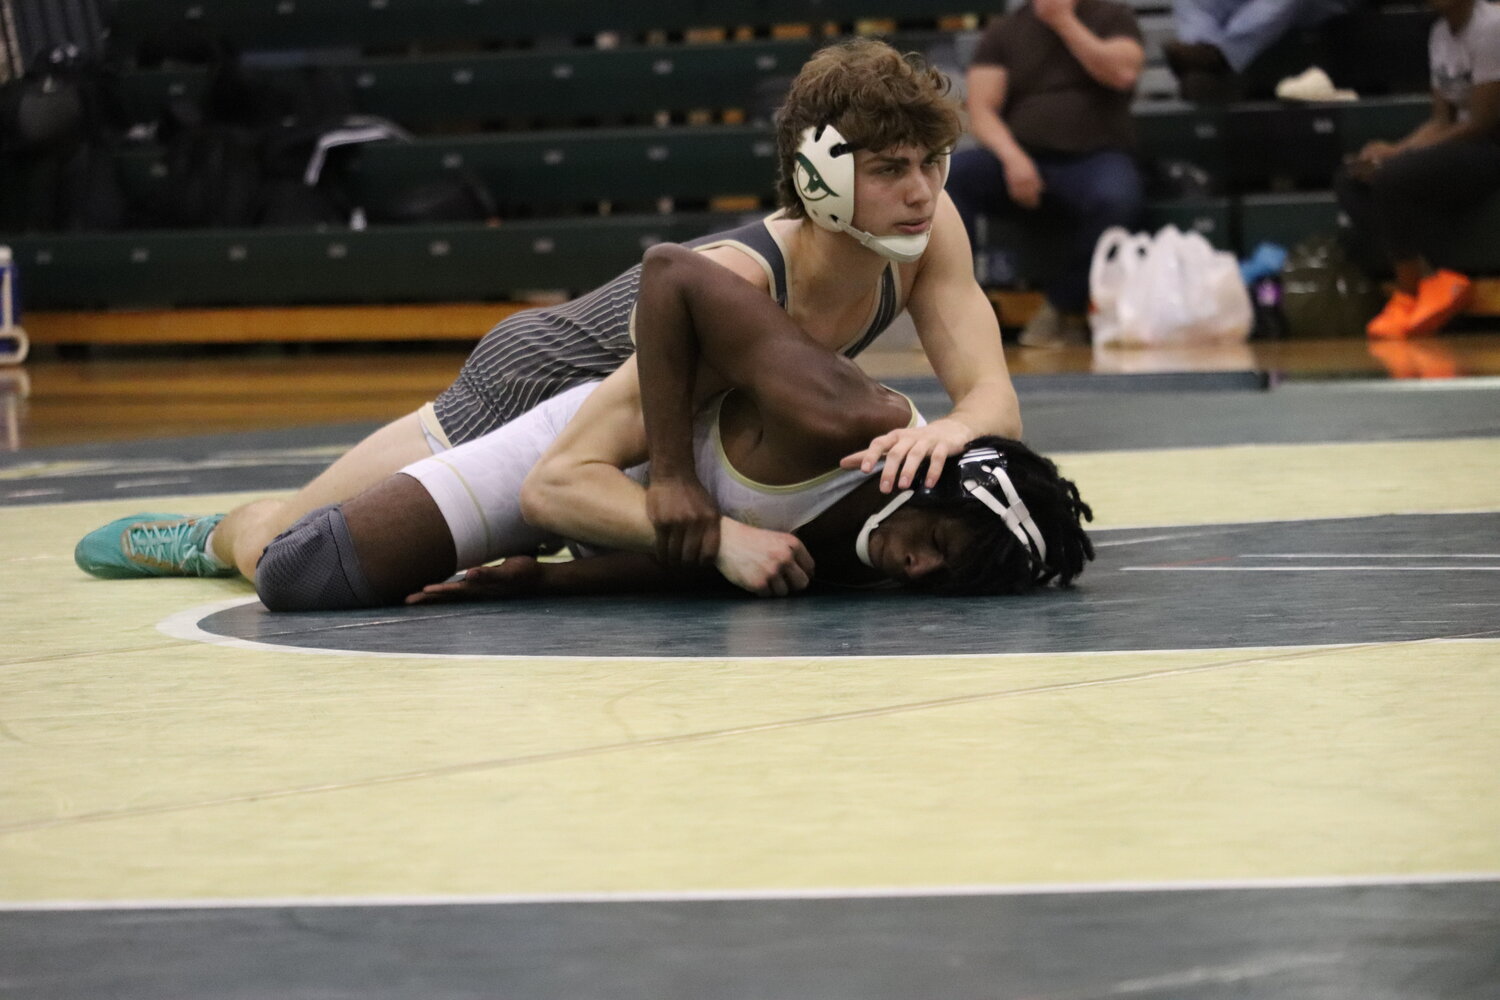 River Bluff advanced to the third round but lost on its home mat to Goose Creek Monday.